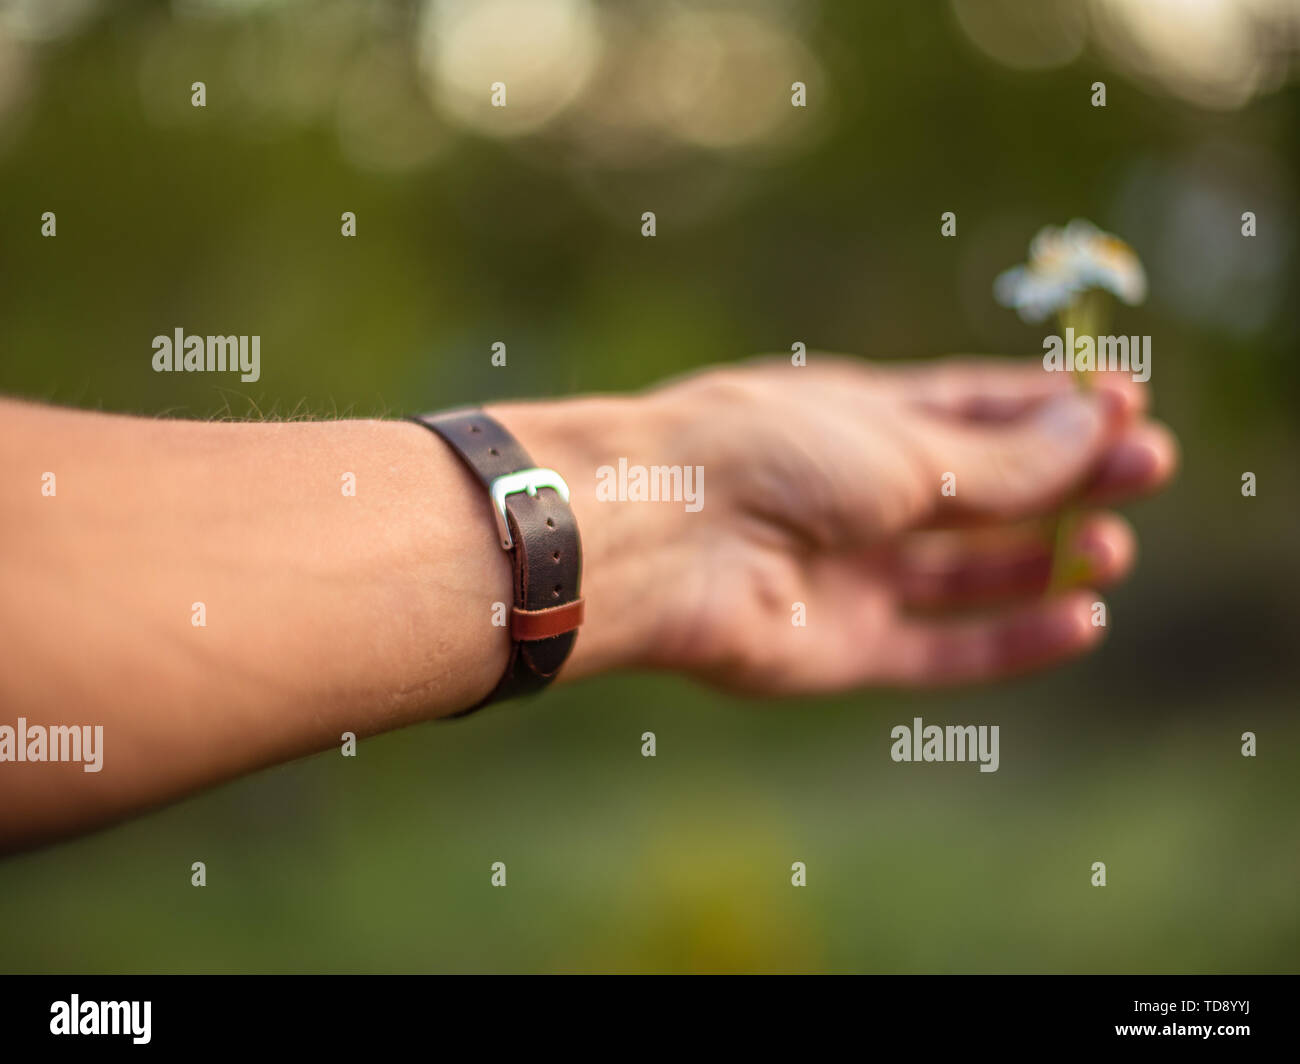 Male hand wearing leather wrist watch, holding a daisy flower out of focus Stock Photo